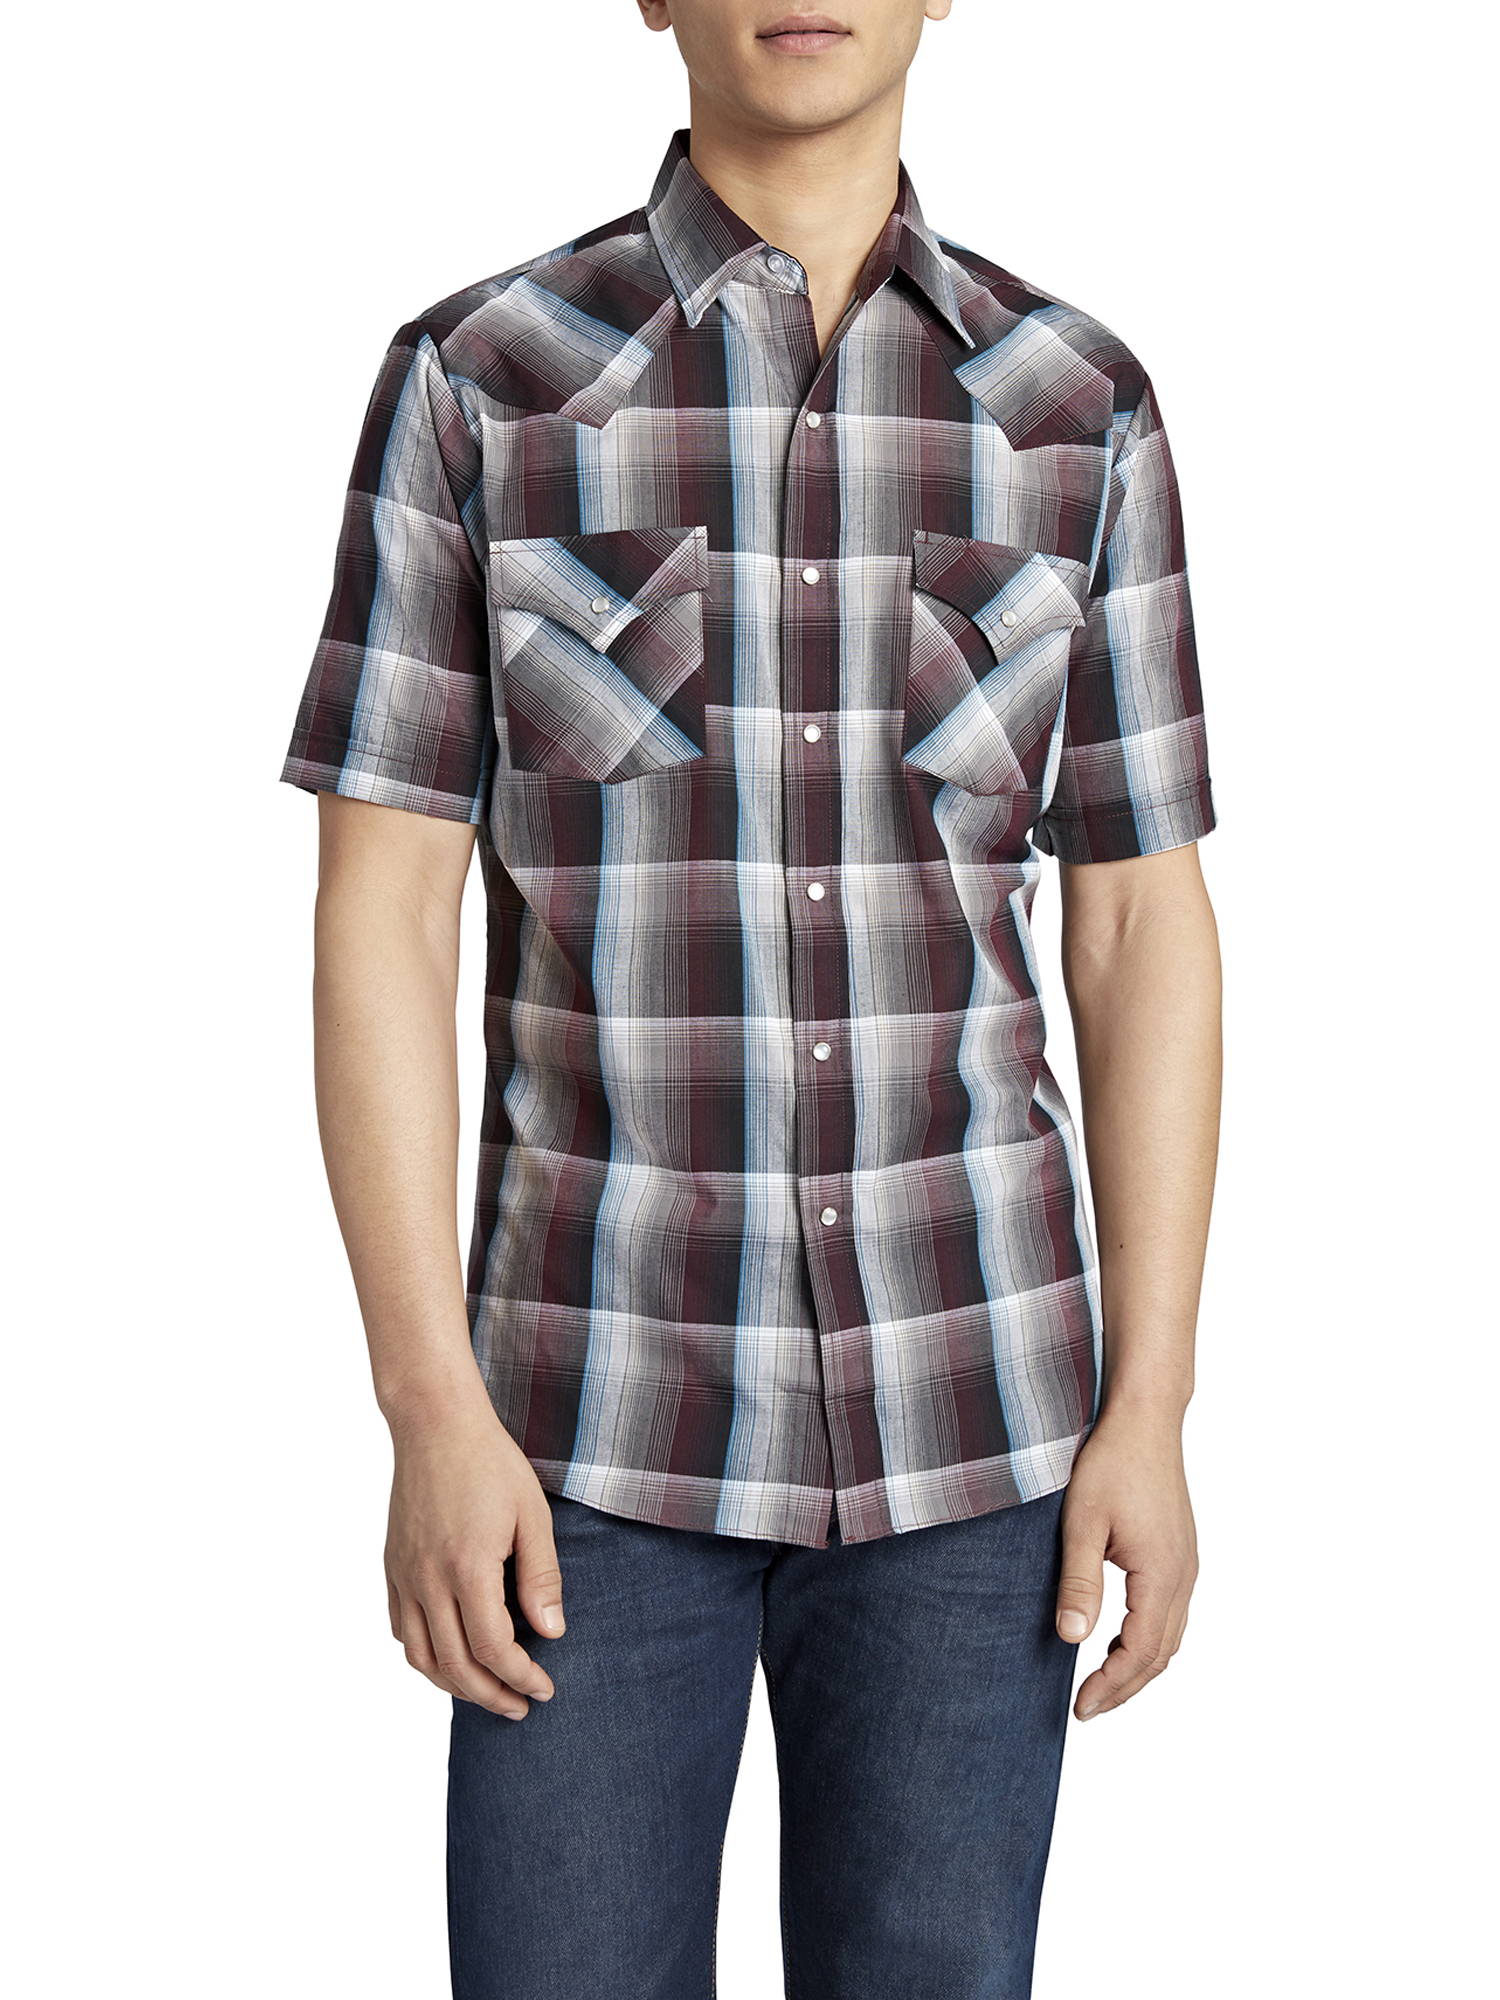 Ely Cattleman Men's Short Sleeve Snap Front Plaid Western Shirt - image 2 of 3